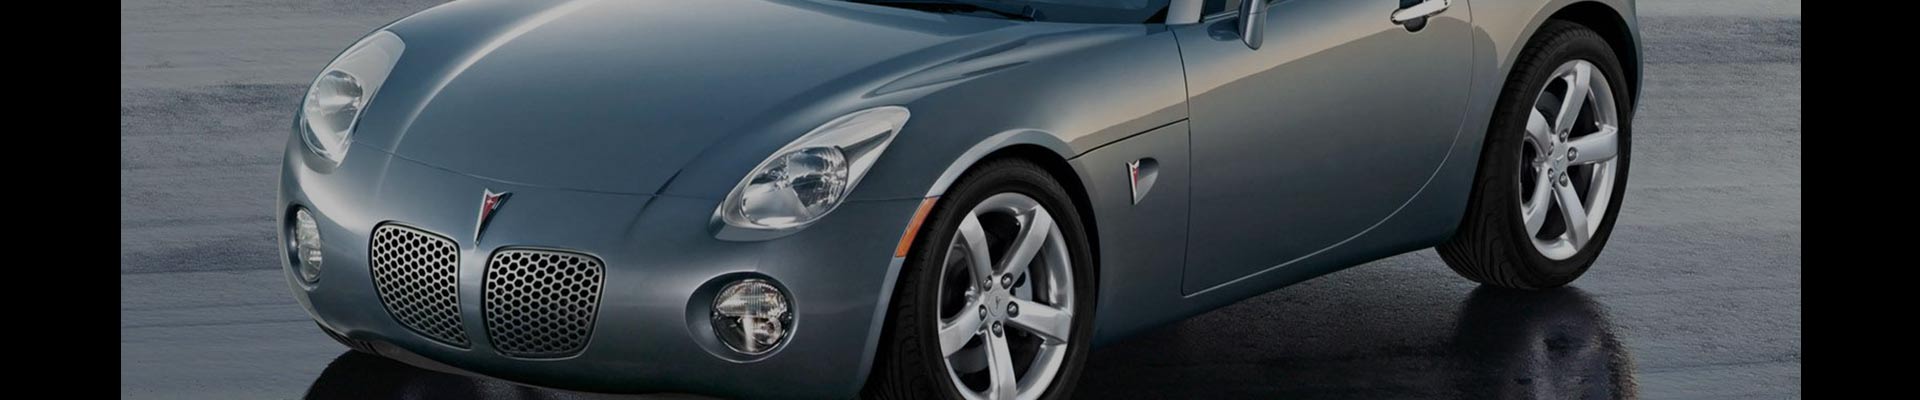 Shop Replacement and OEM 2008 Pontiac Solstice Parts with Discounted Price on the Net